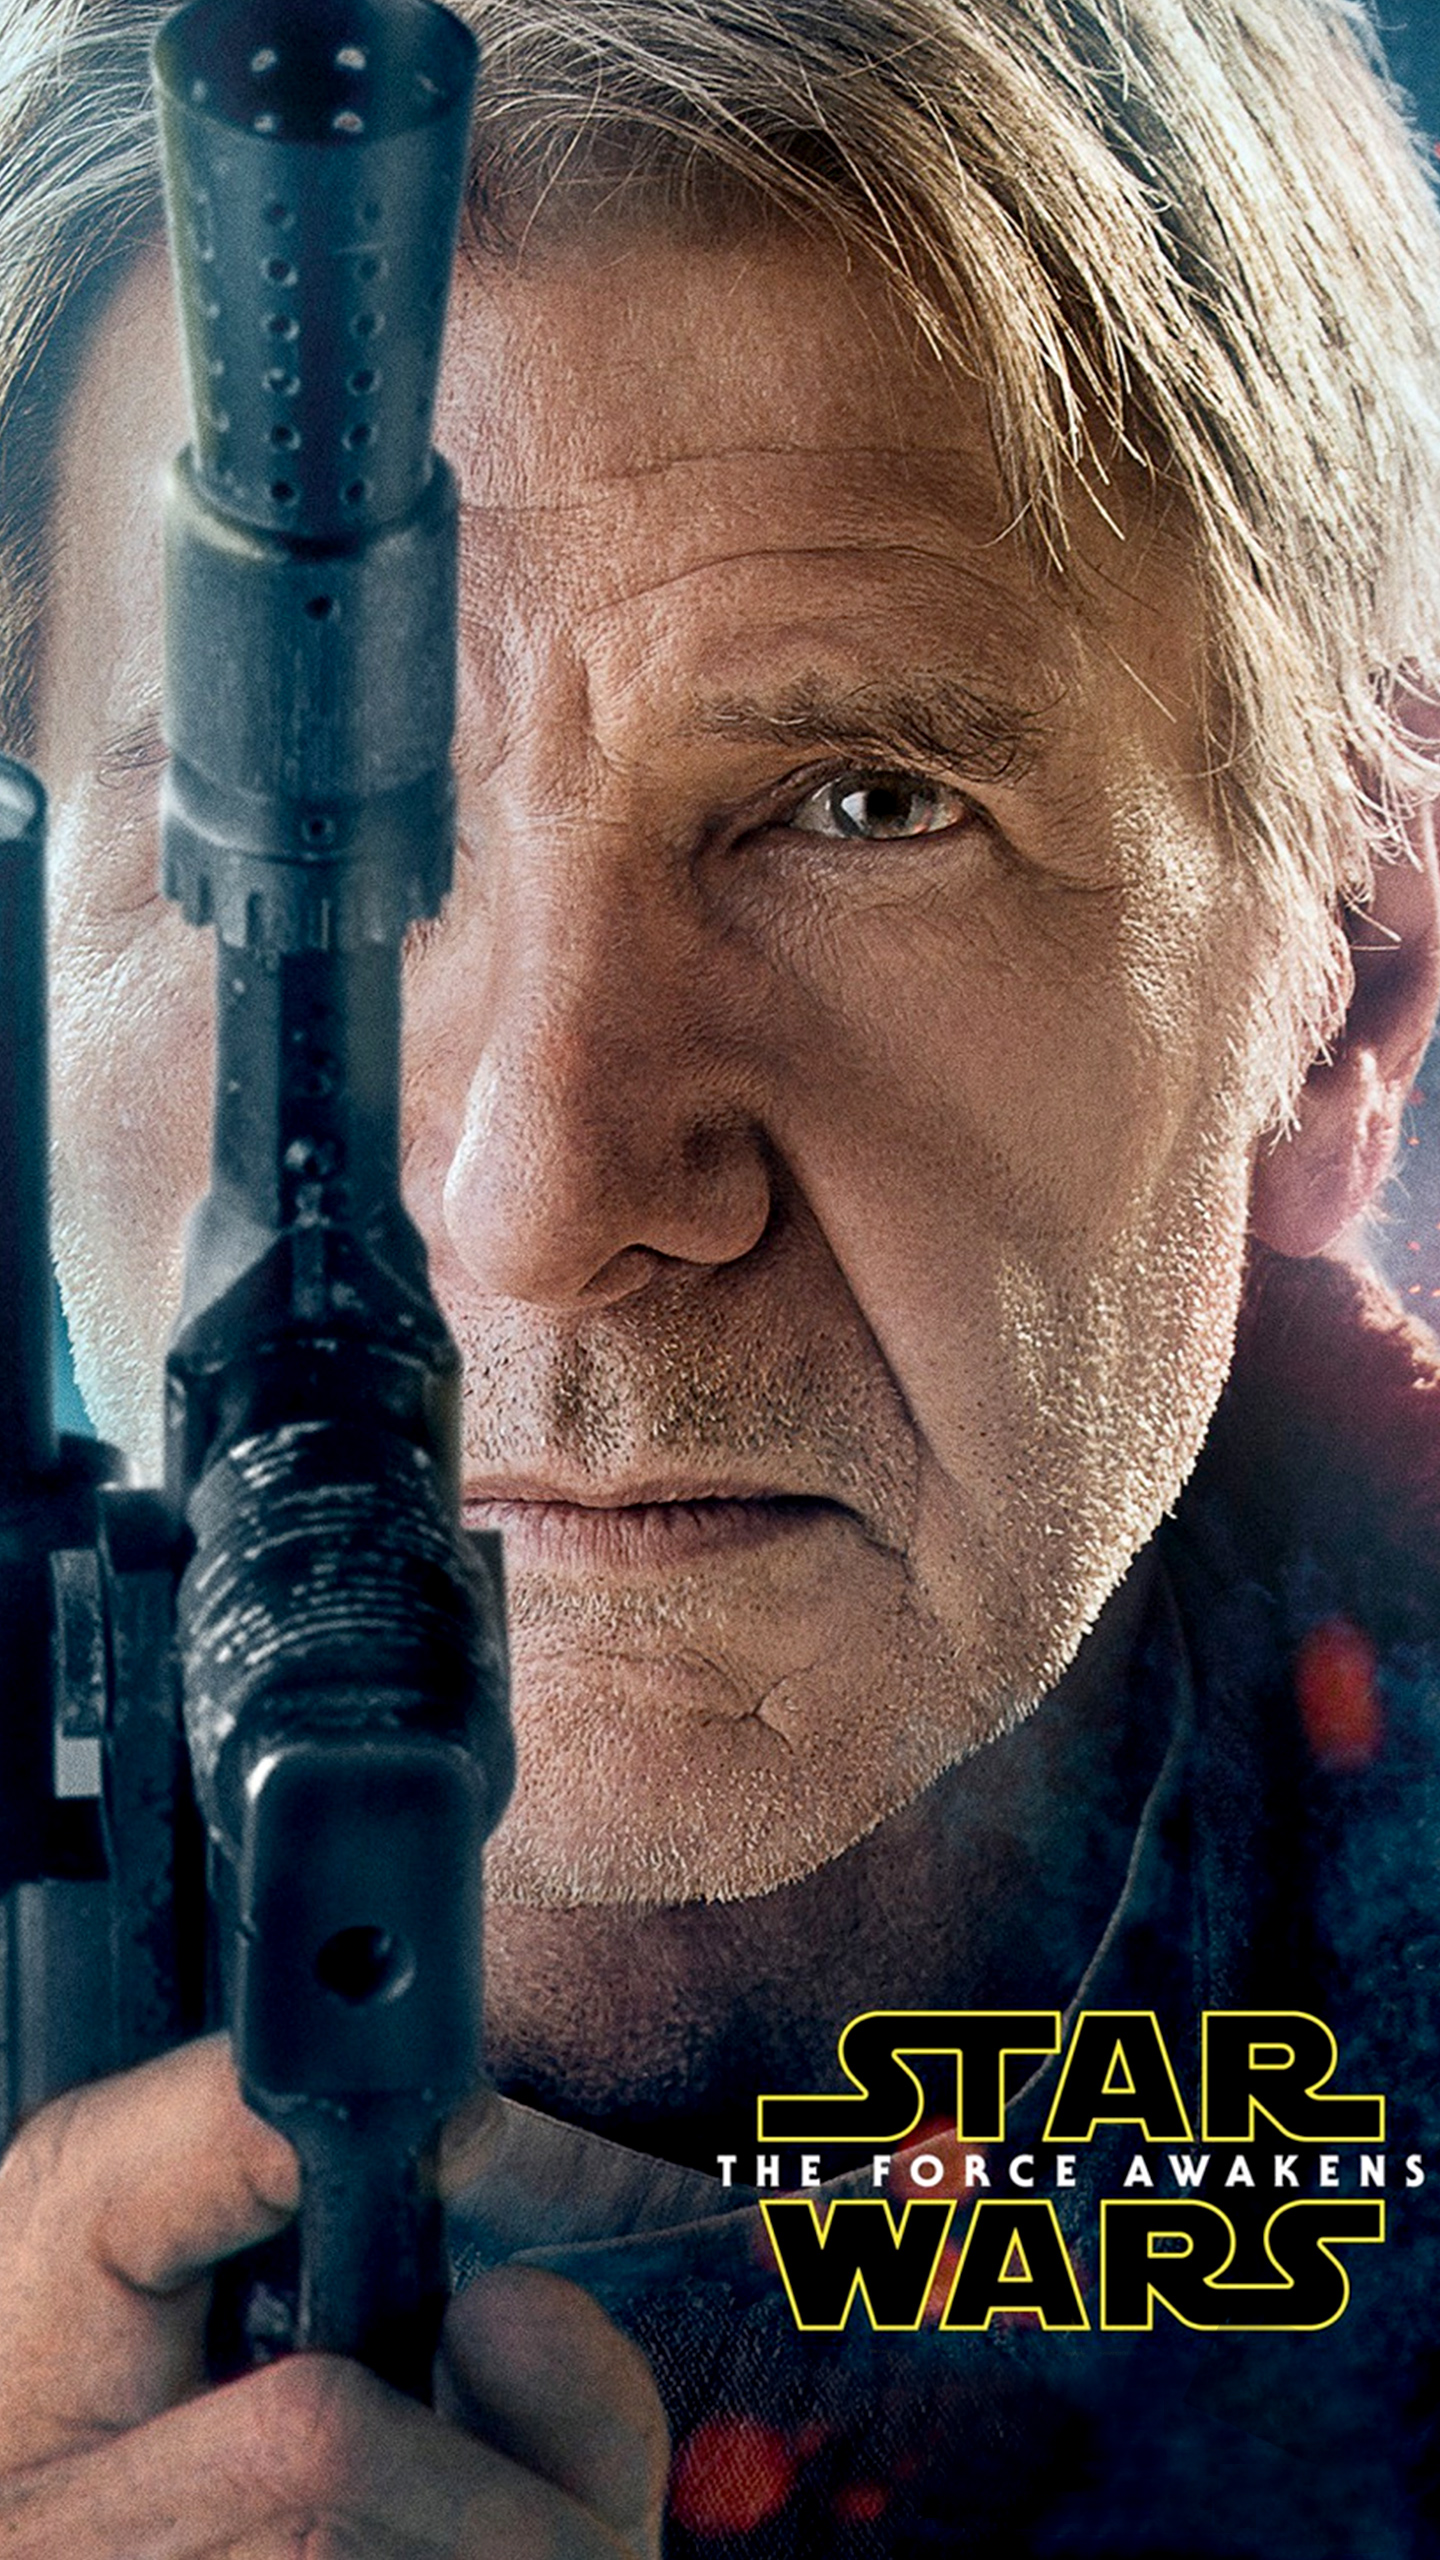 Han Solo PNG File Download Free - PNG All